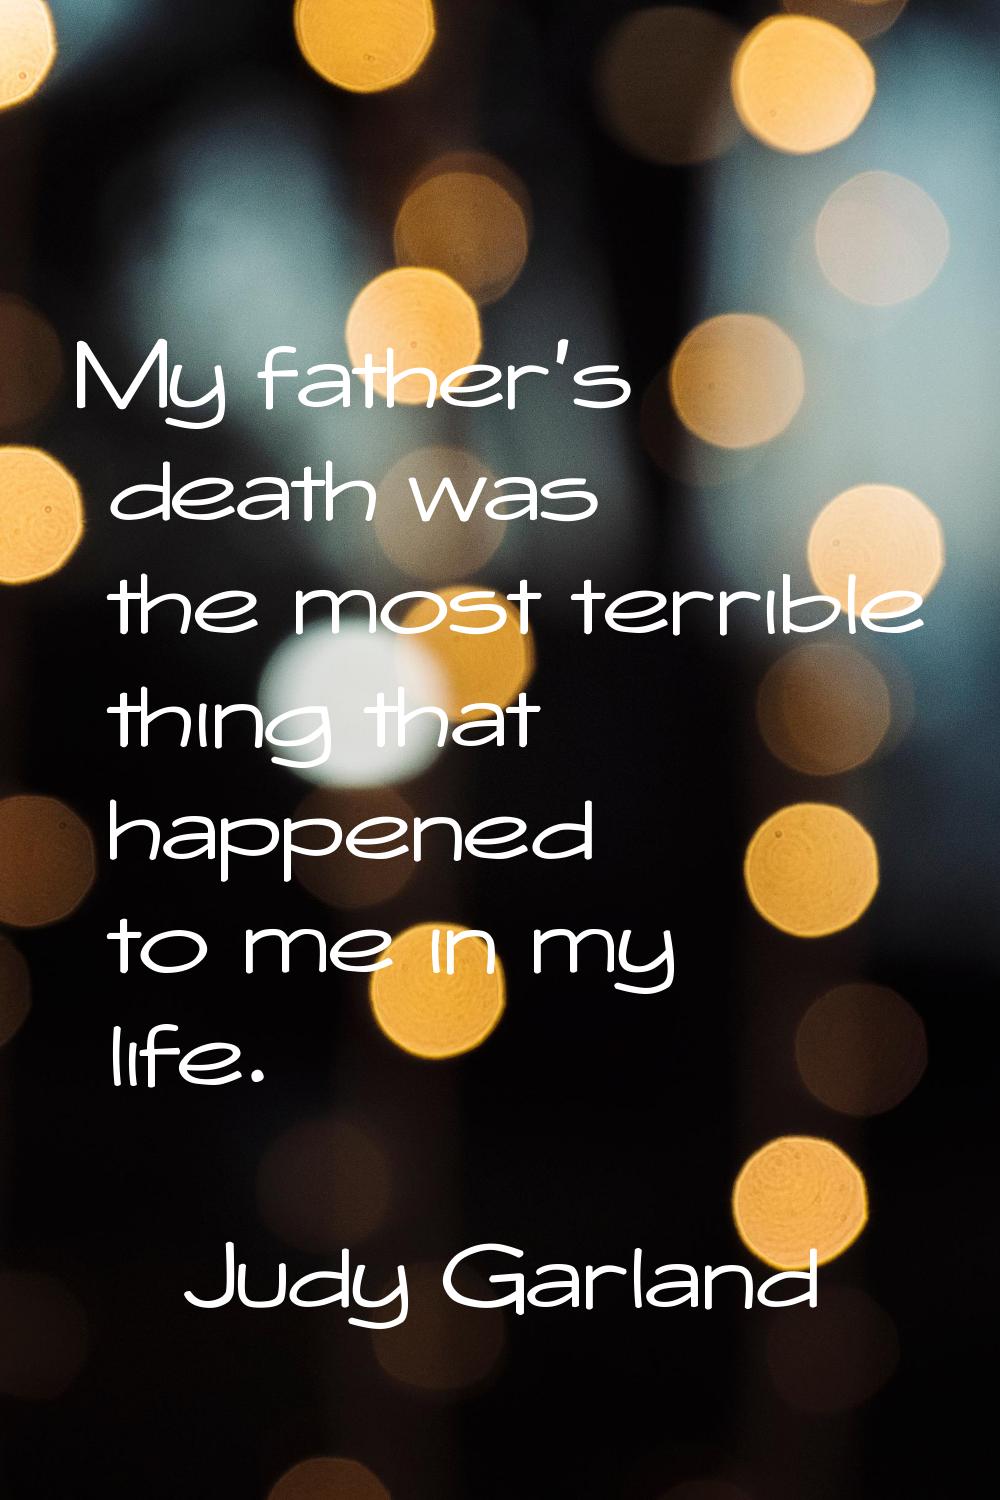 My father's death was the most terrible thing that happened to me in my life.